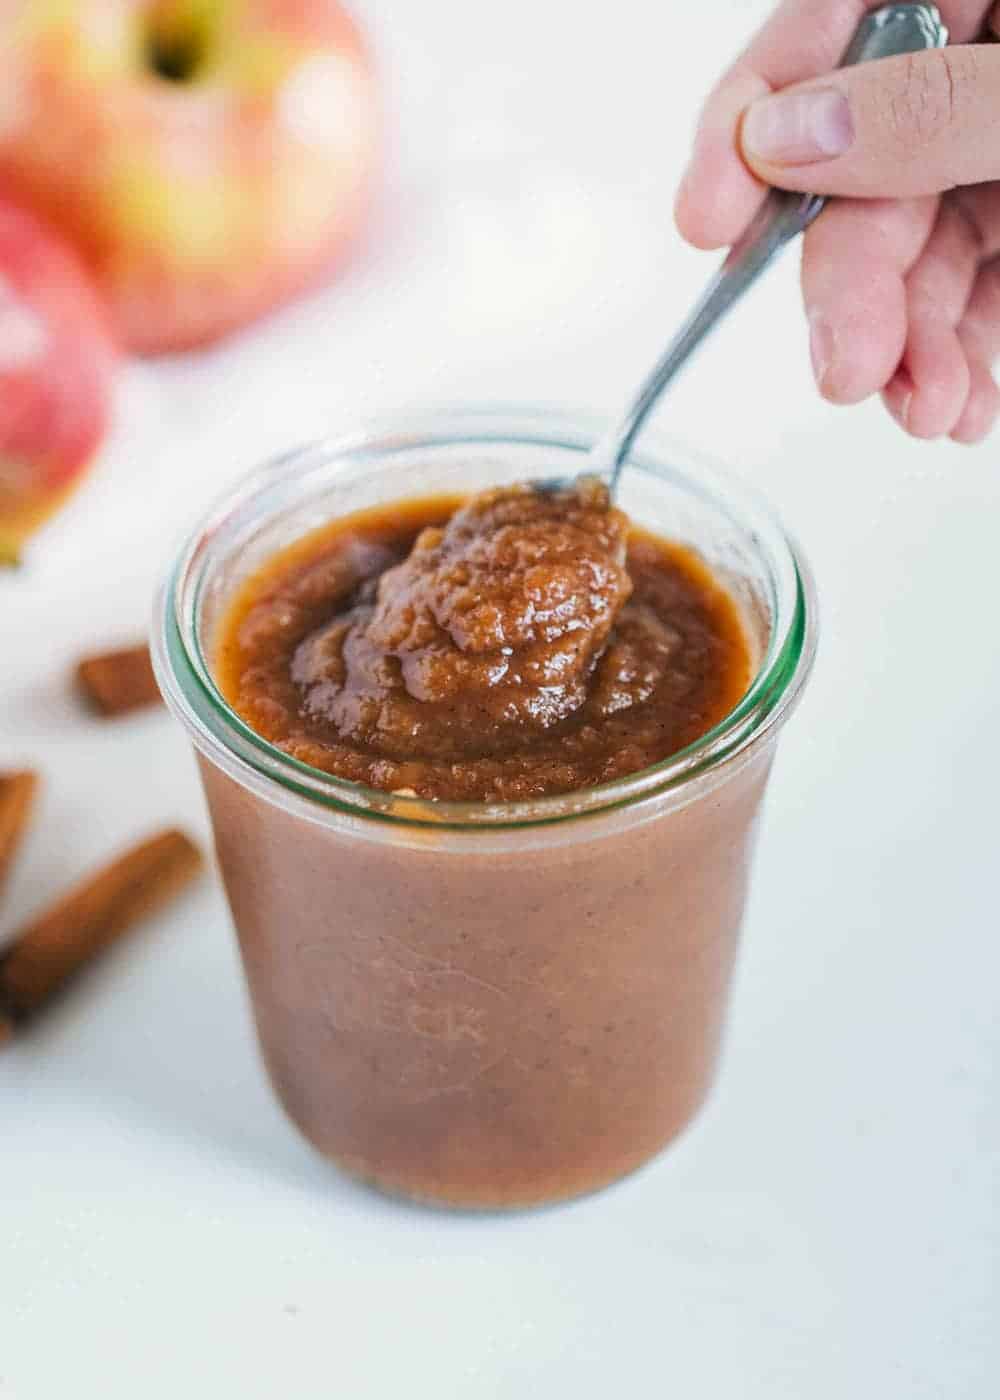 Apple butter in jar with spoon.